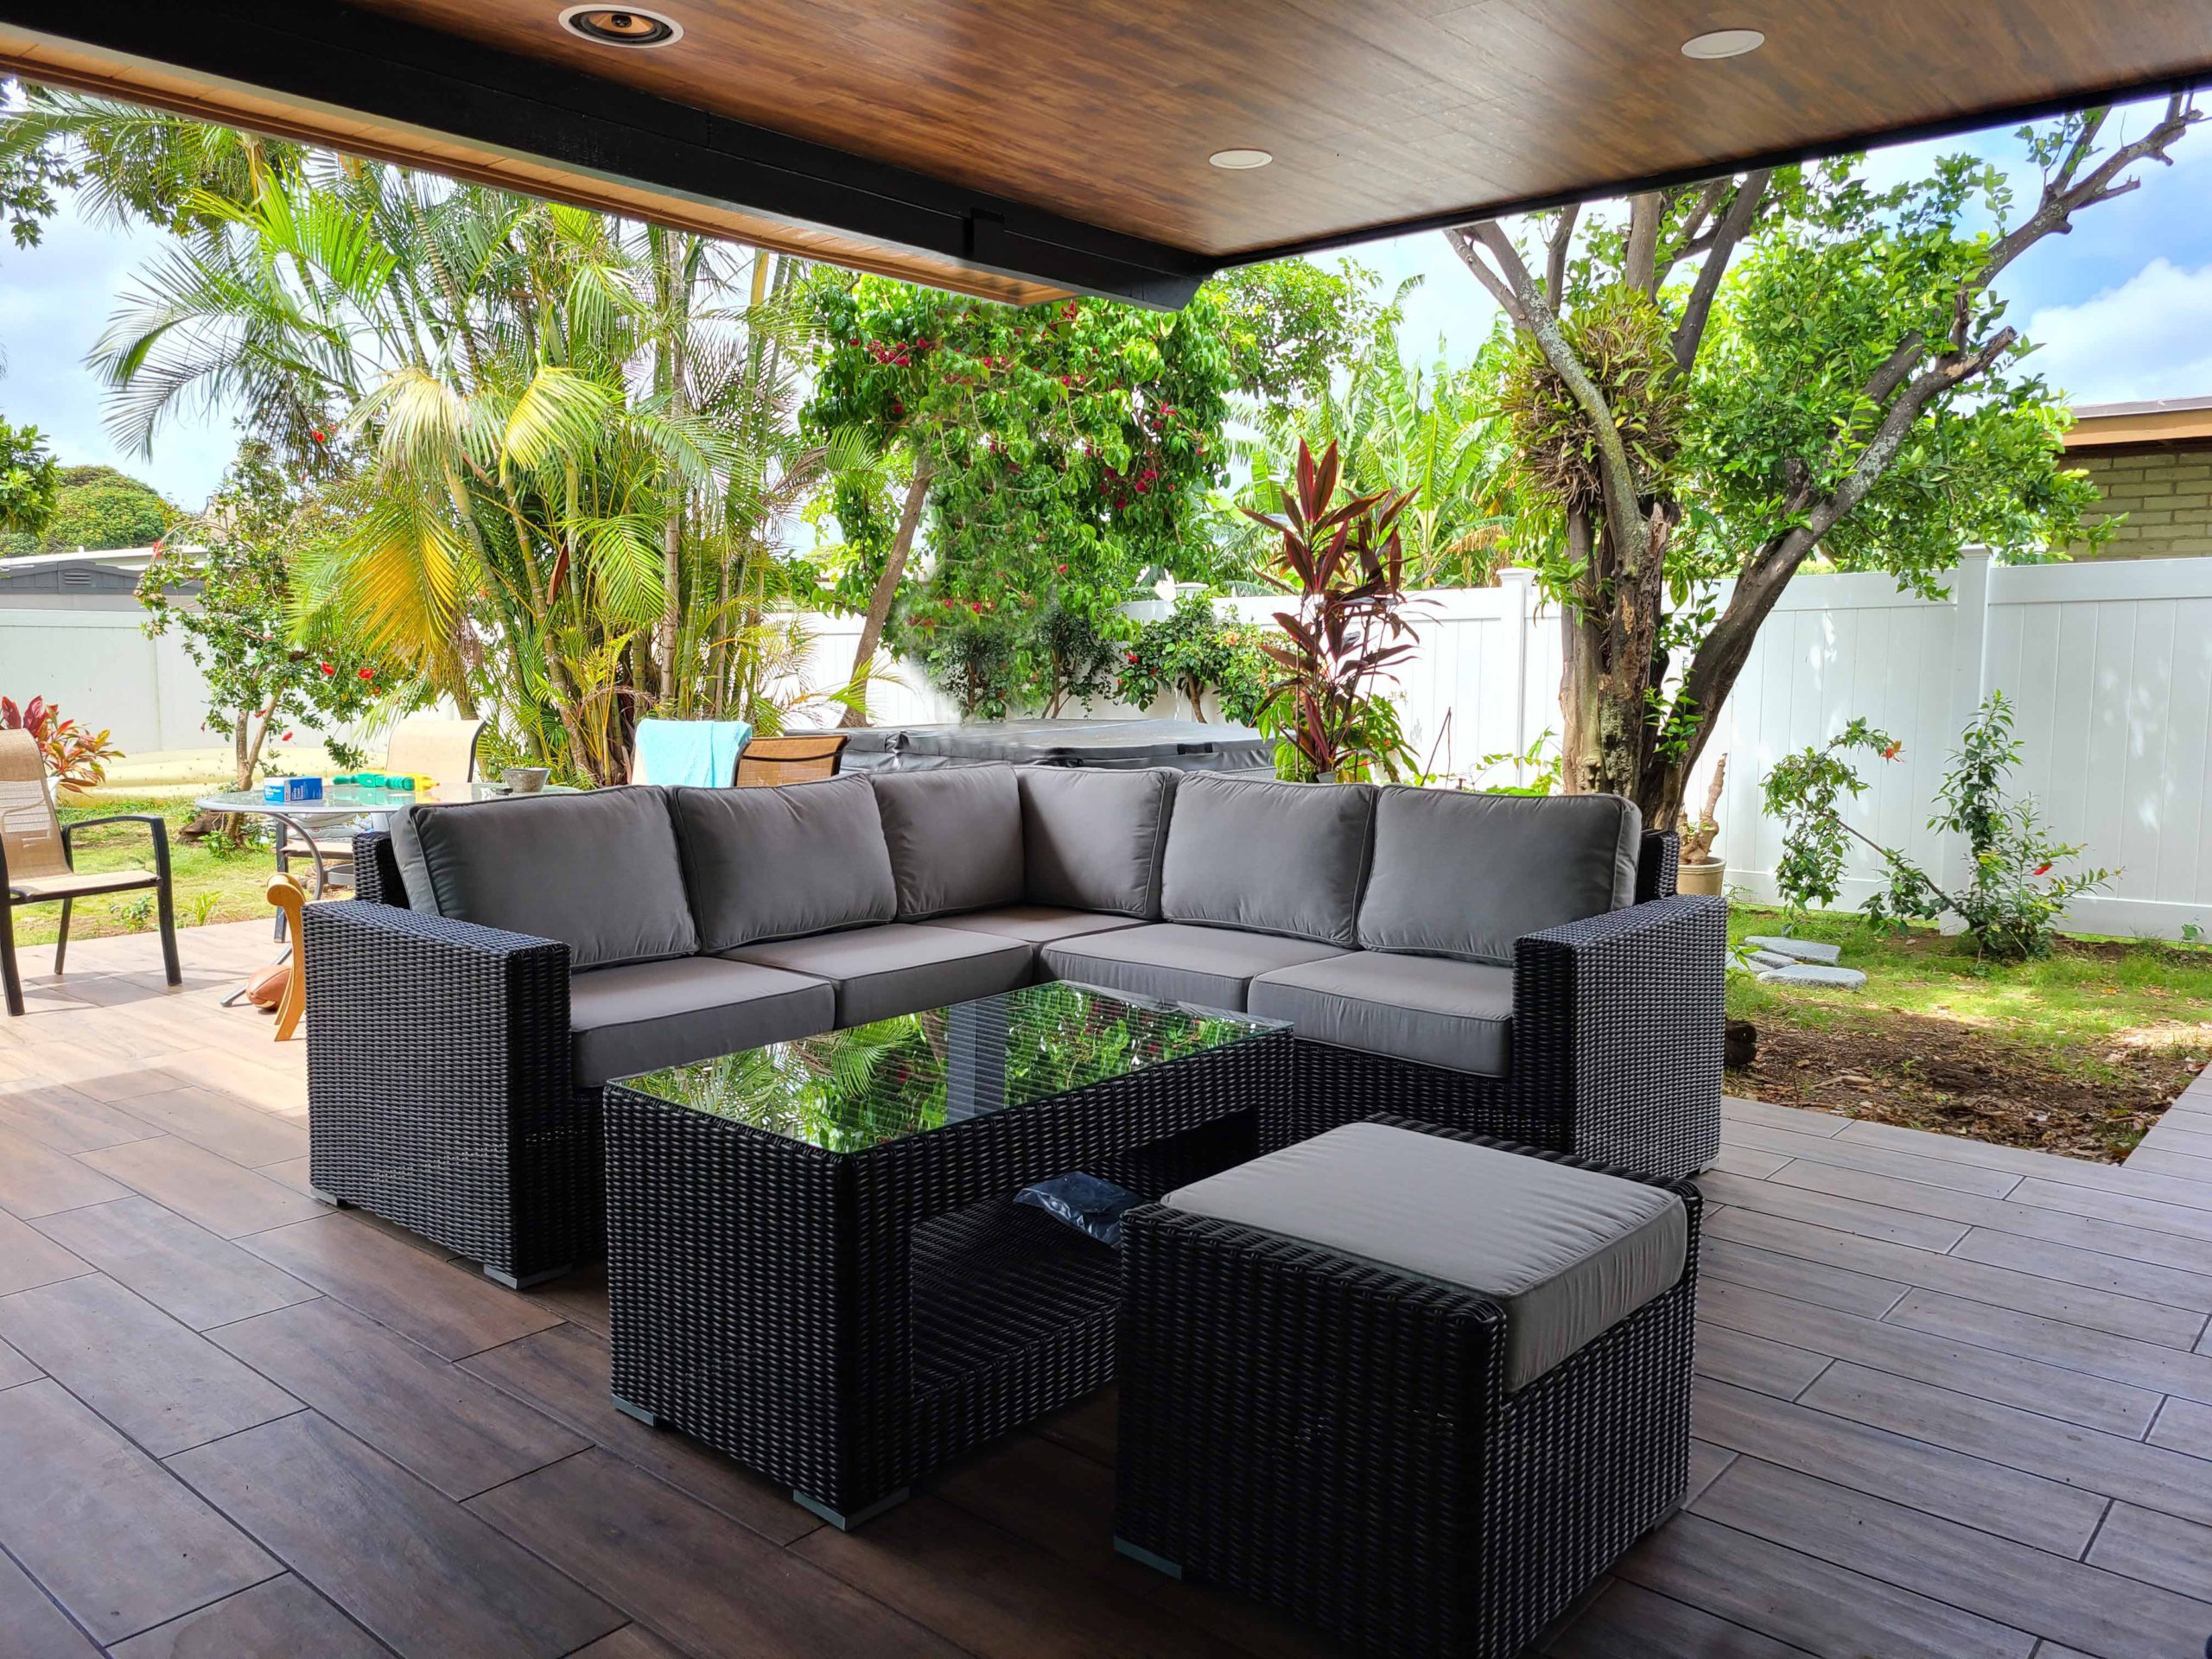 The Sectional 6 Piece with 1 footrest with brown rattan and gray cushions.